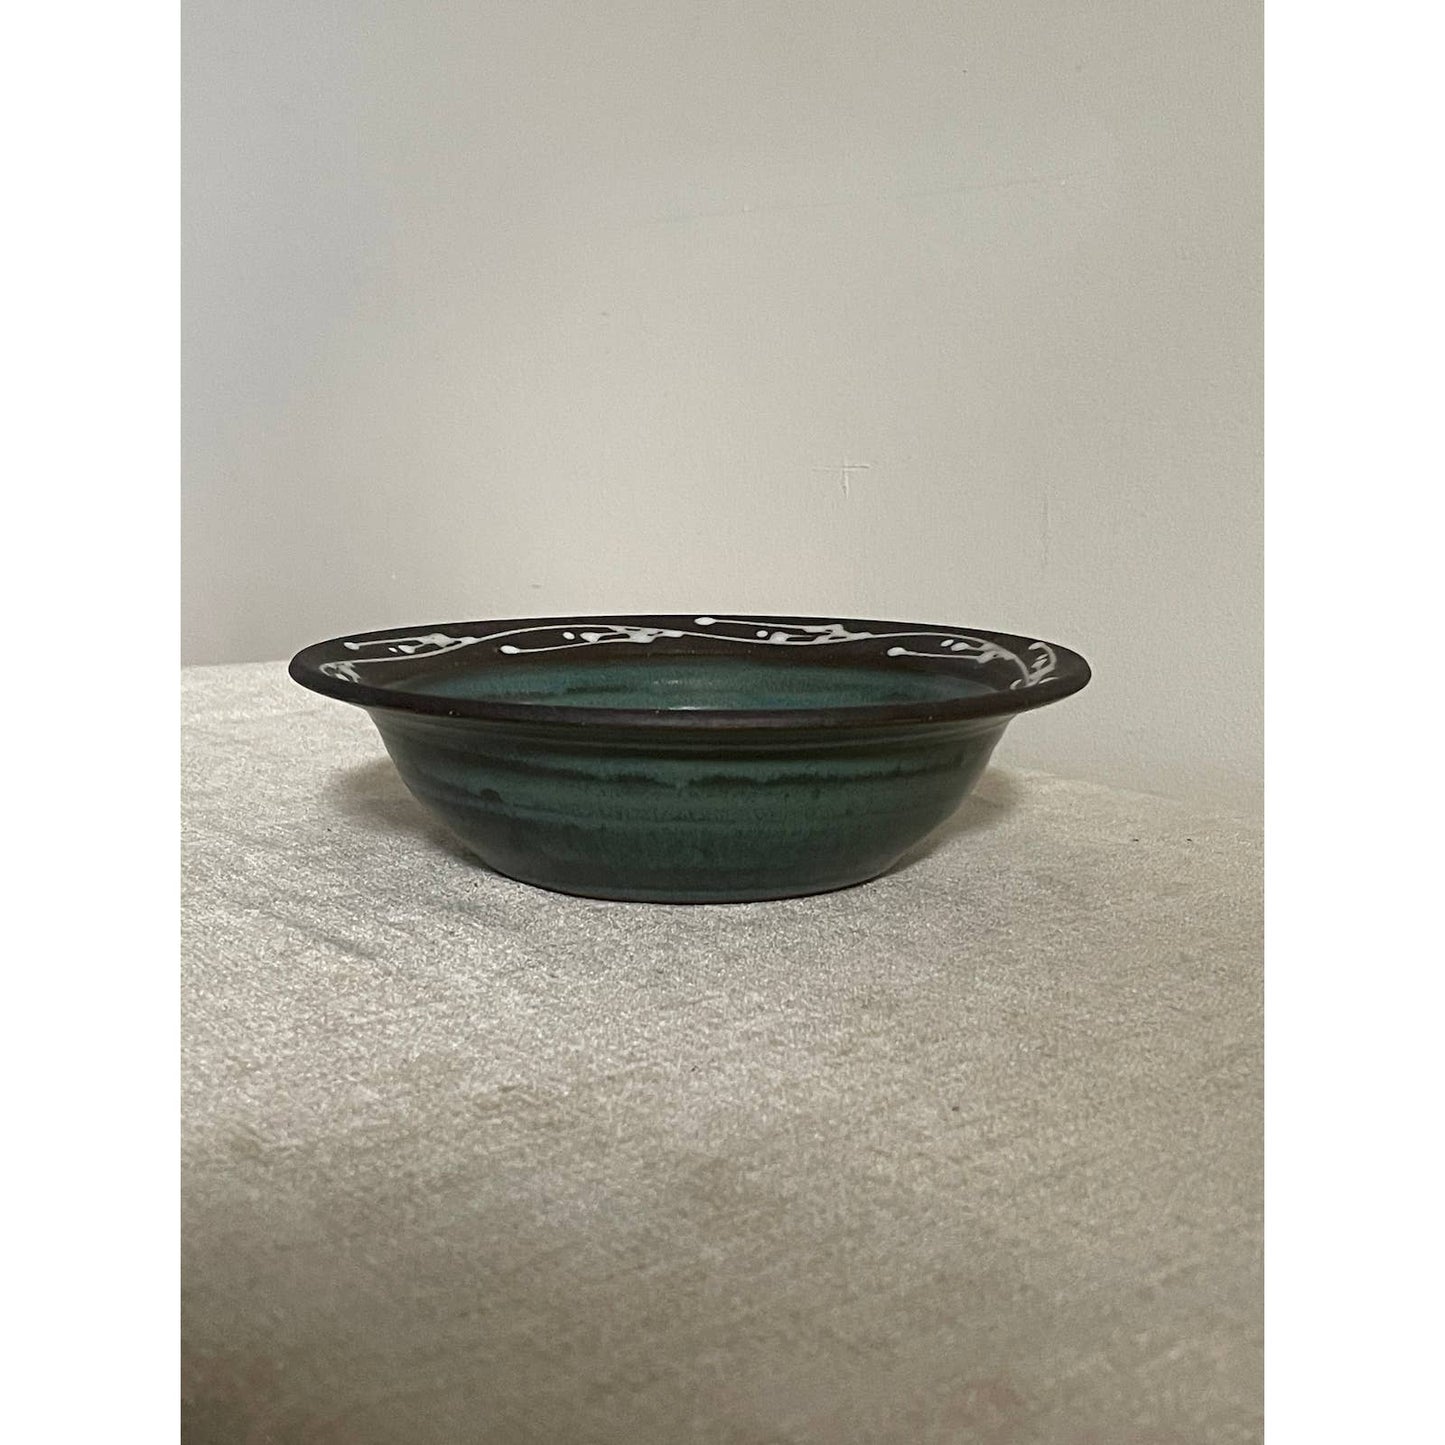 Teal Catch All Bowl by Gil 1999